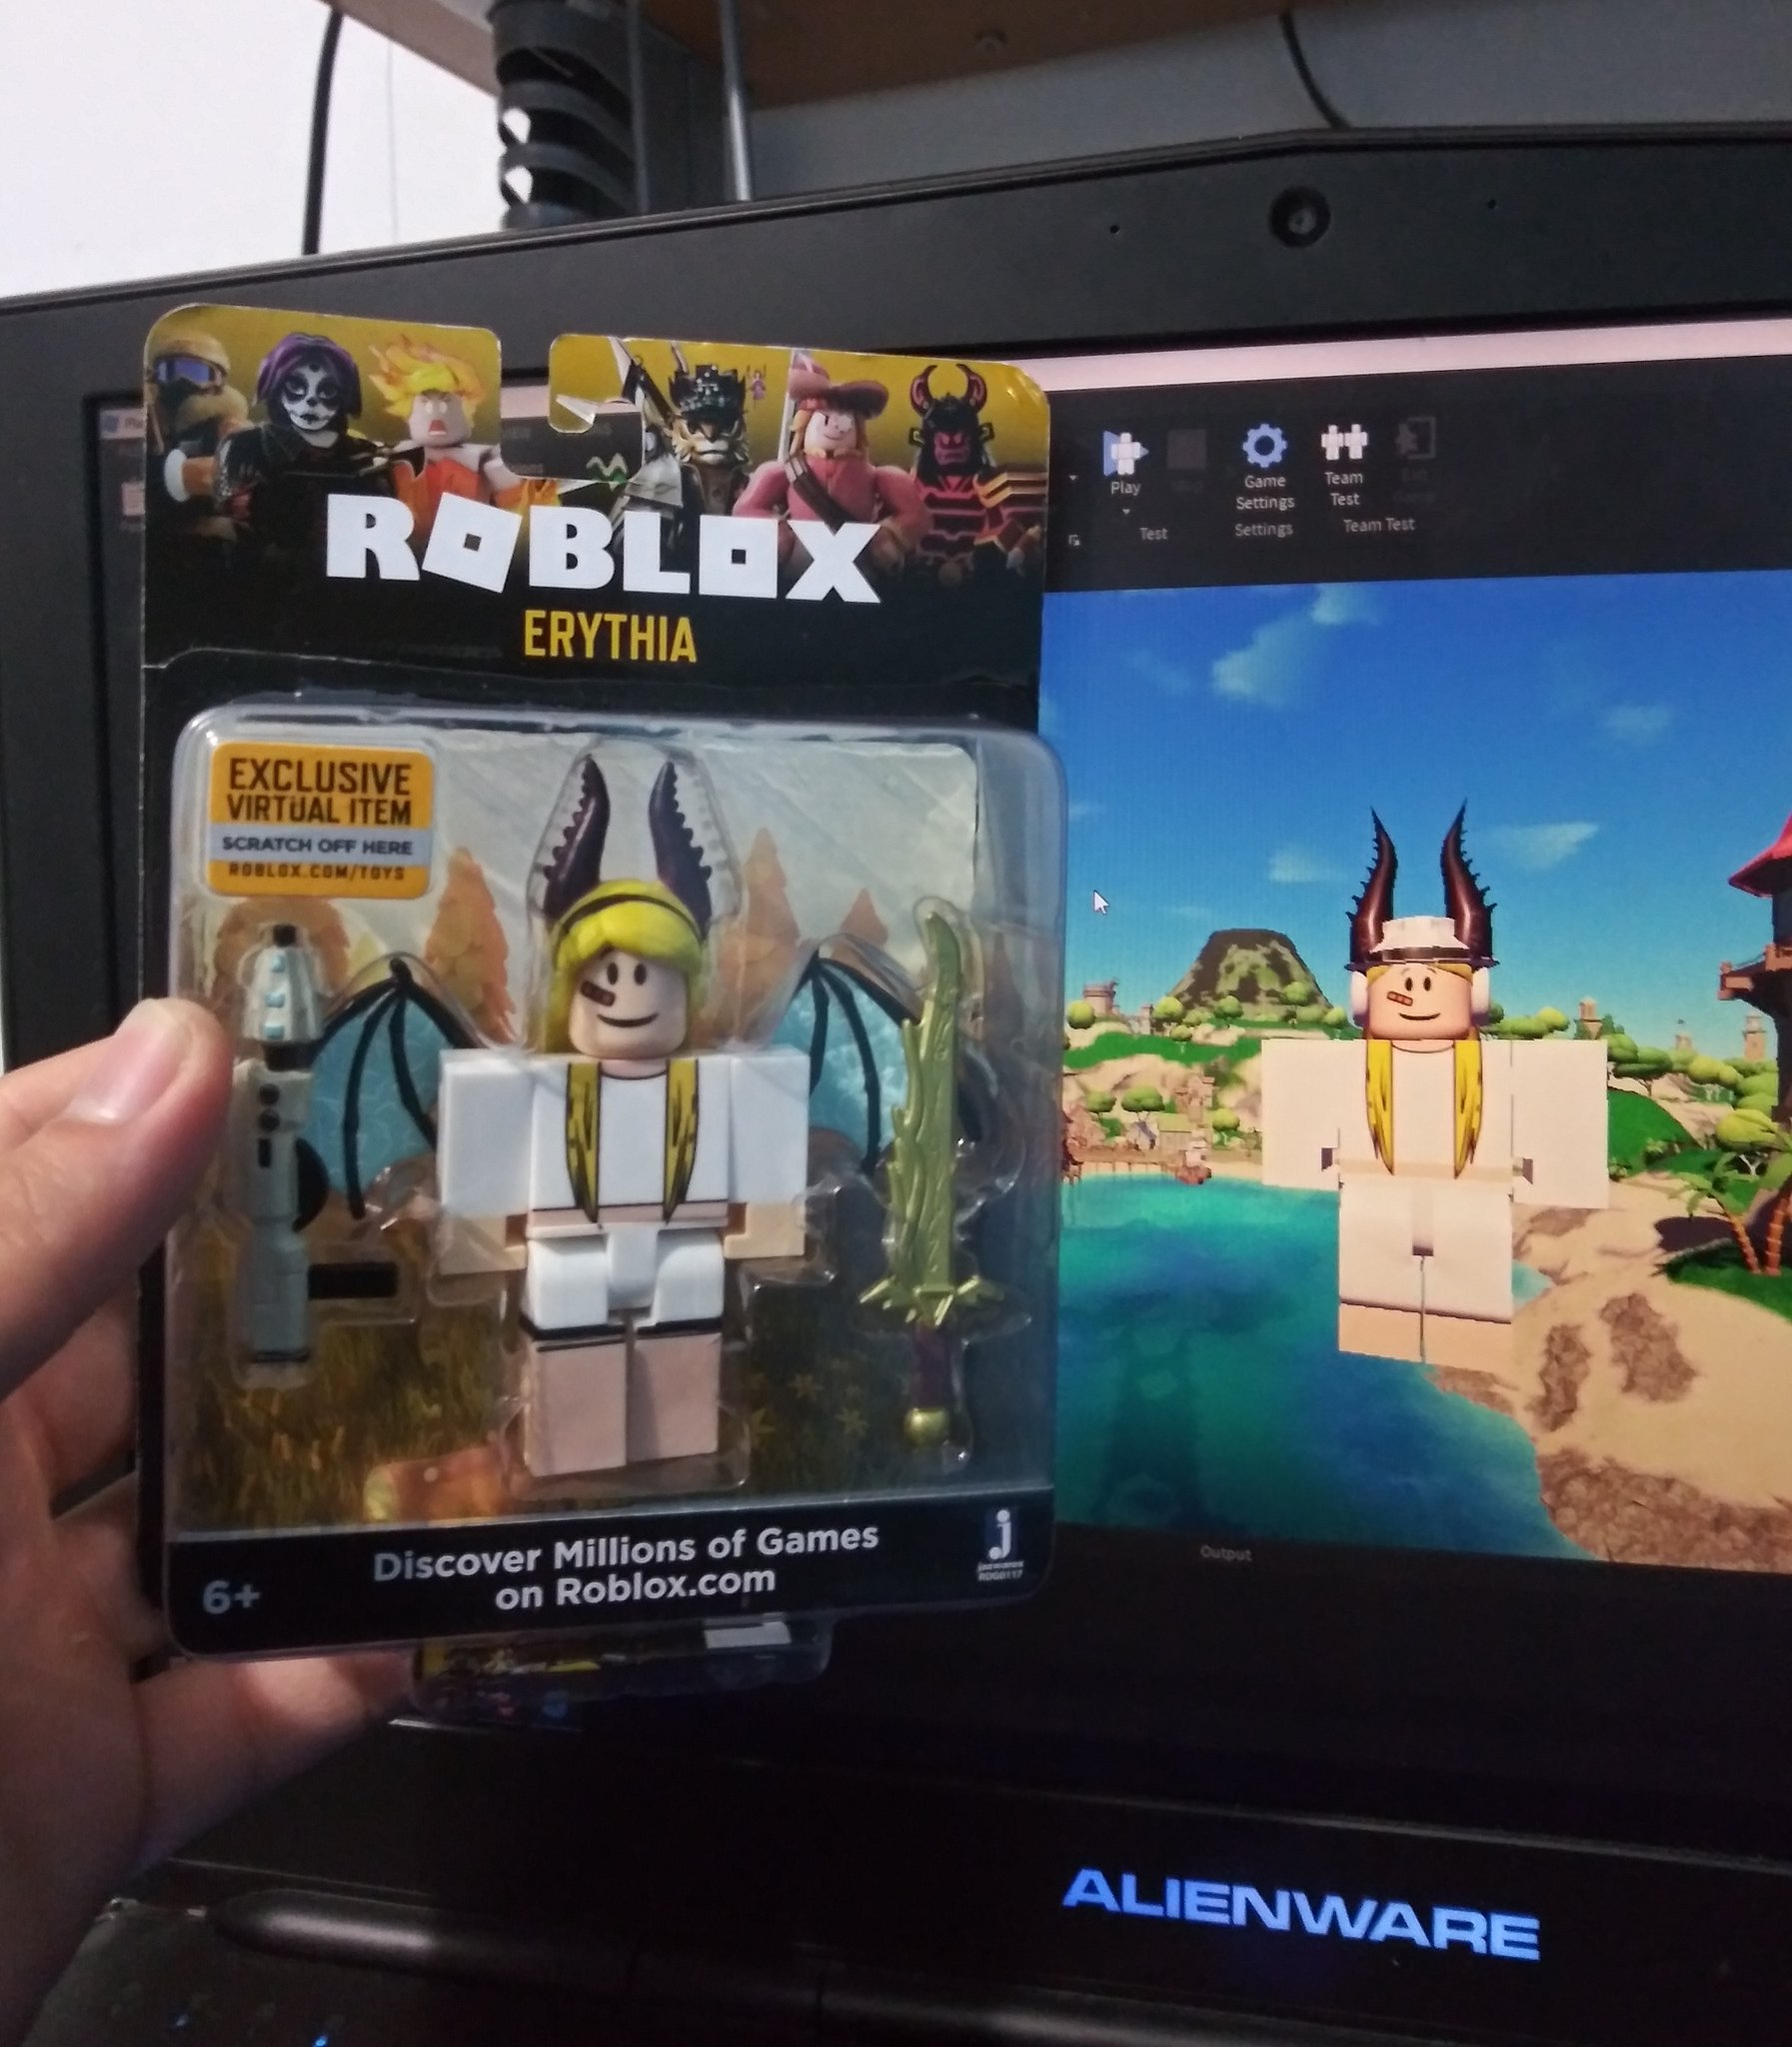 D Vhoodie On Twitter Just Bought An Erythia Roblox Toy So I Can